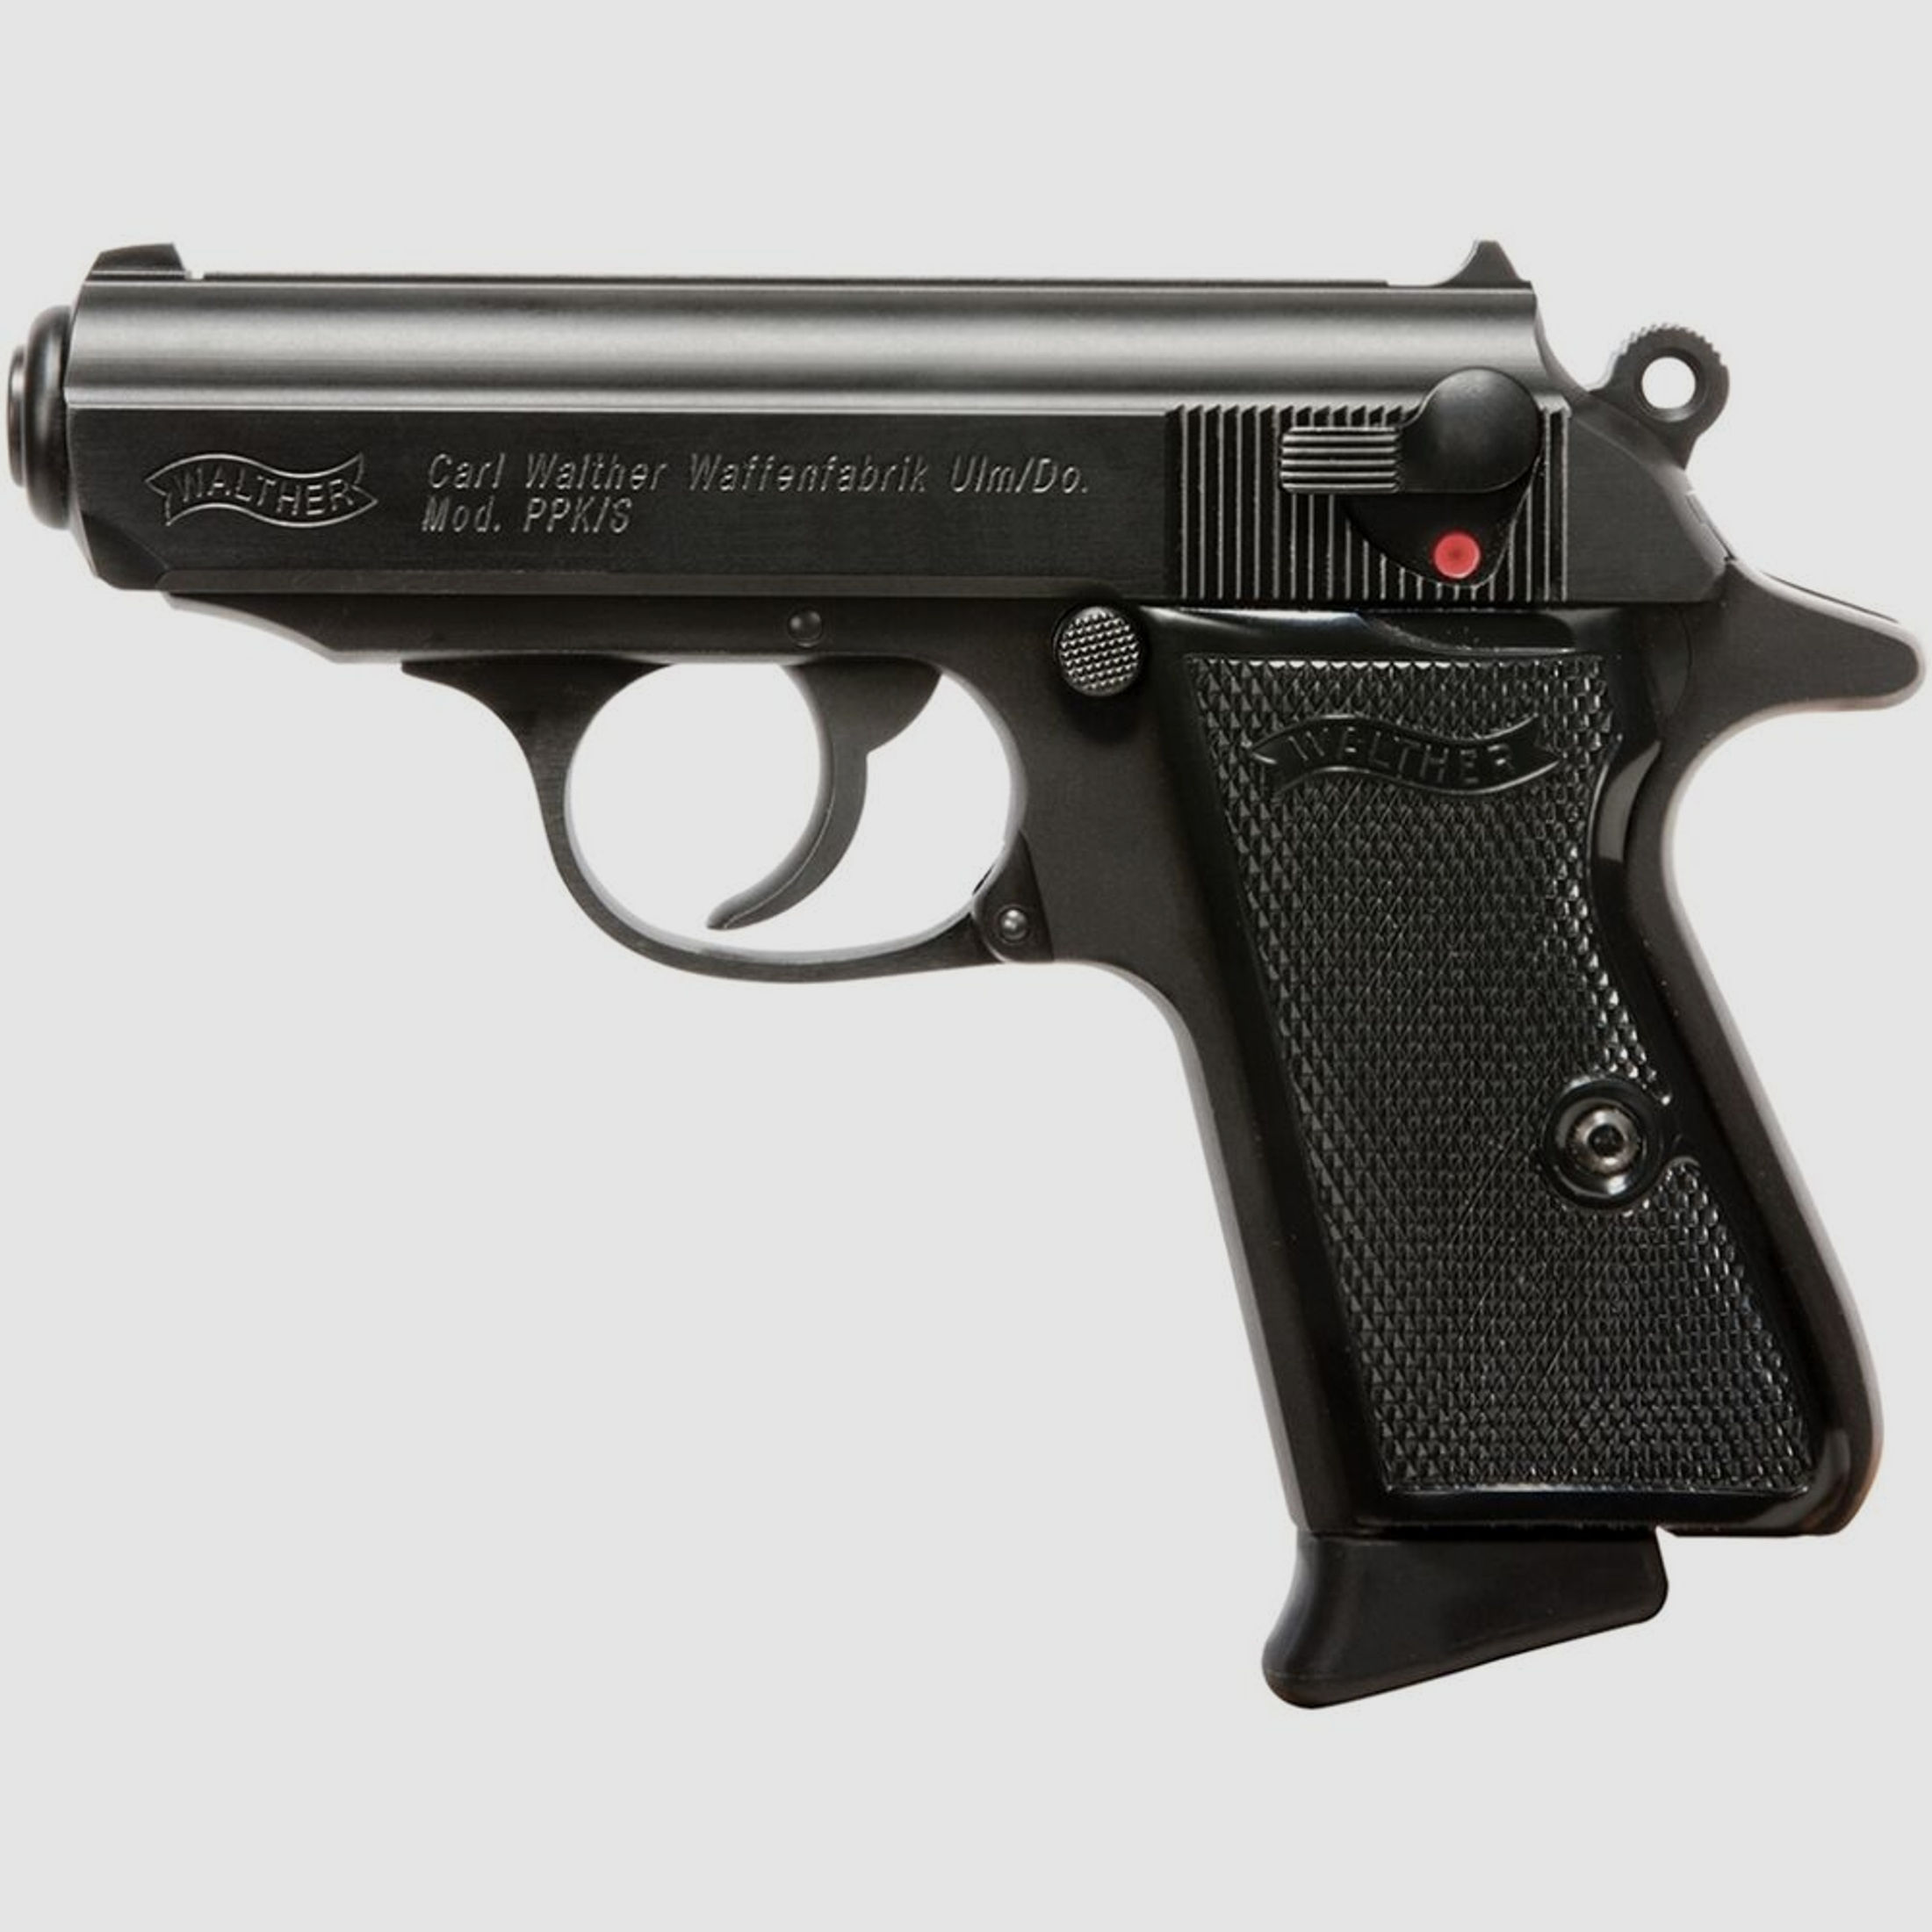 Walther	 PPK/S - Kaliber .22 lfb. Pistole